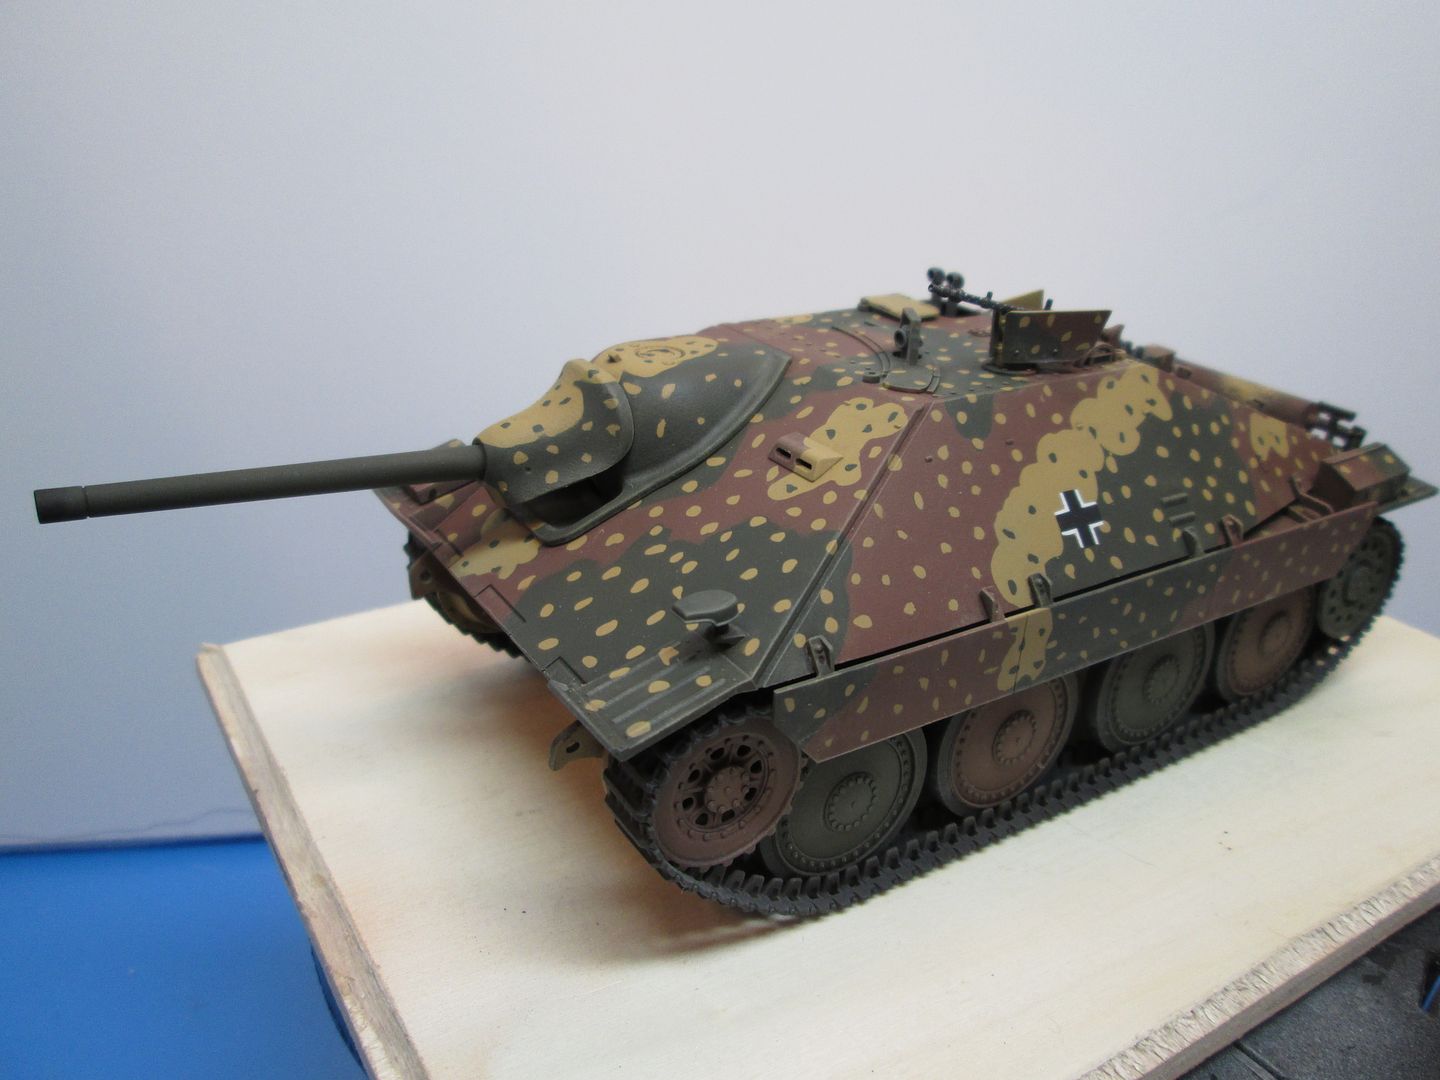 Plastic Pics - HyperScale's Picture Posting Forum: Tamiya 1/35 Hetzer